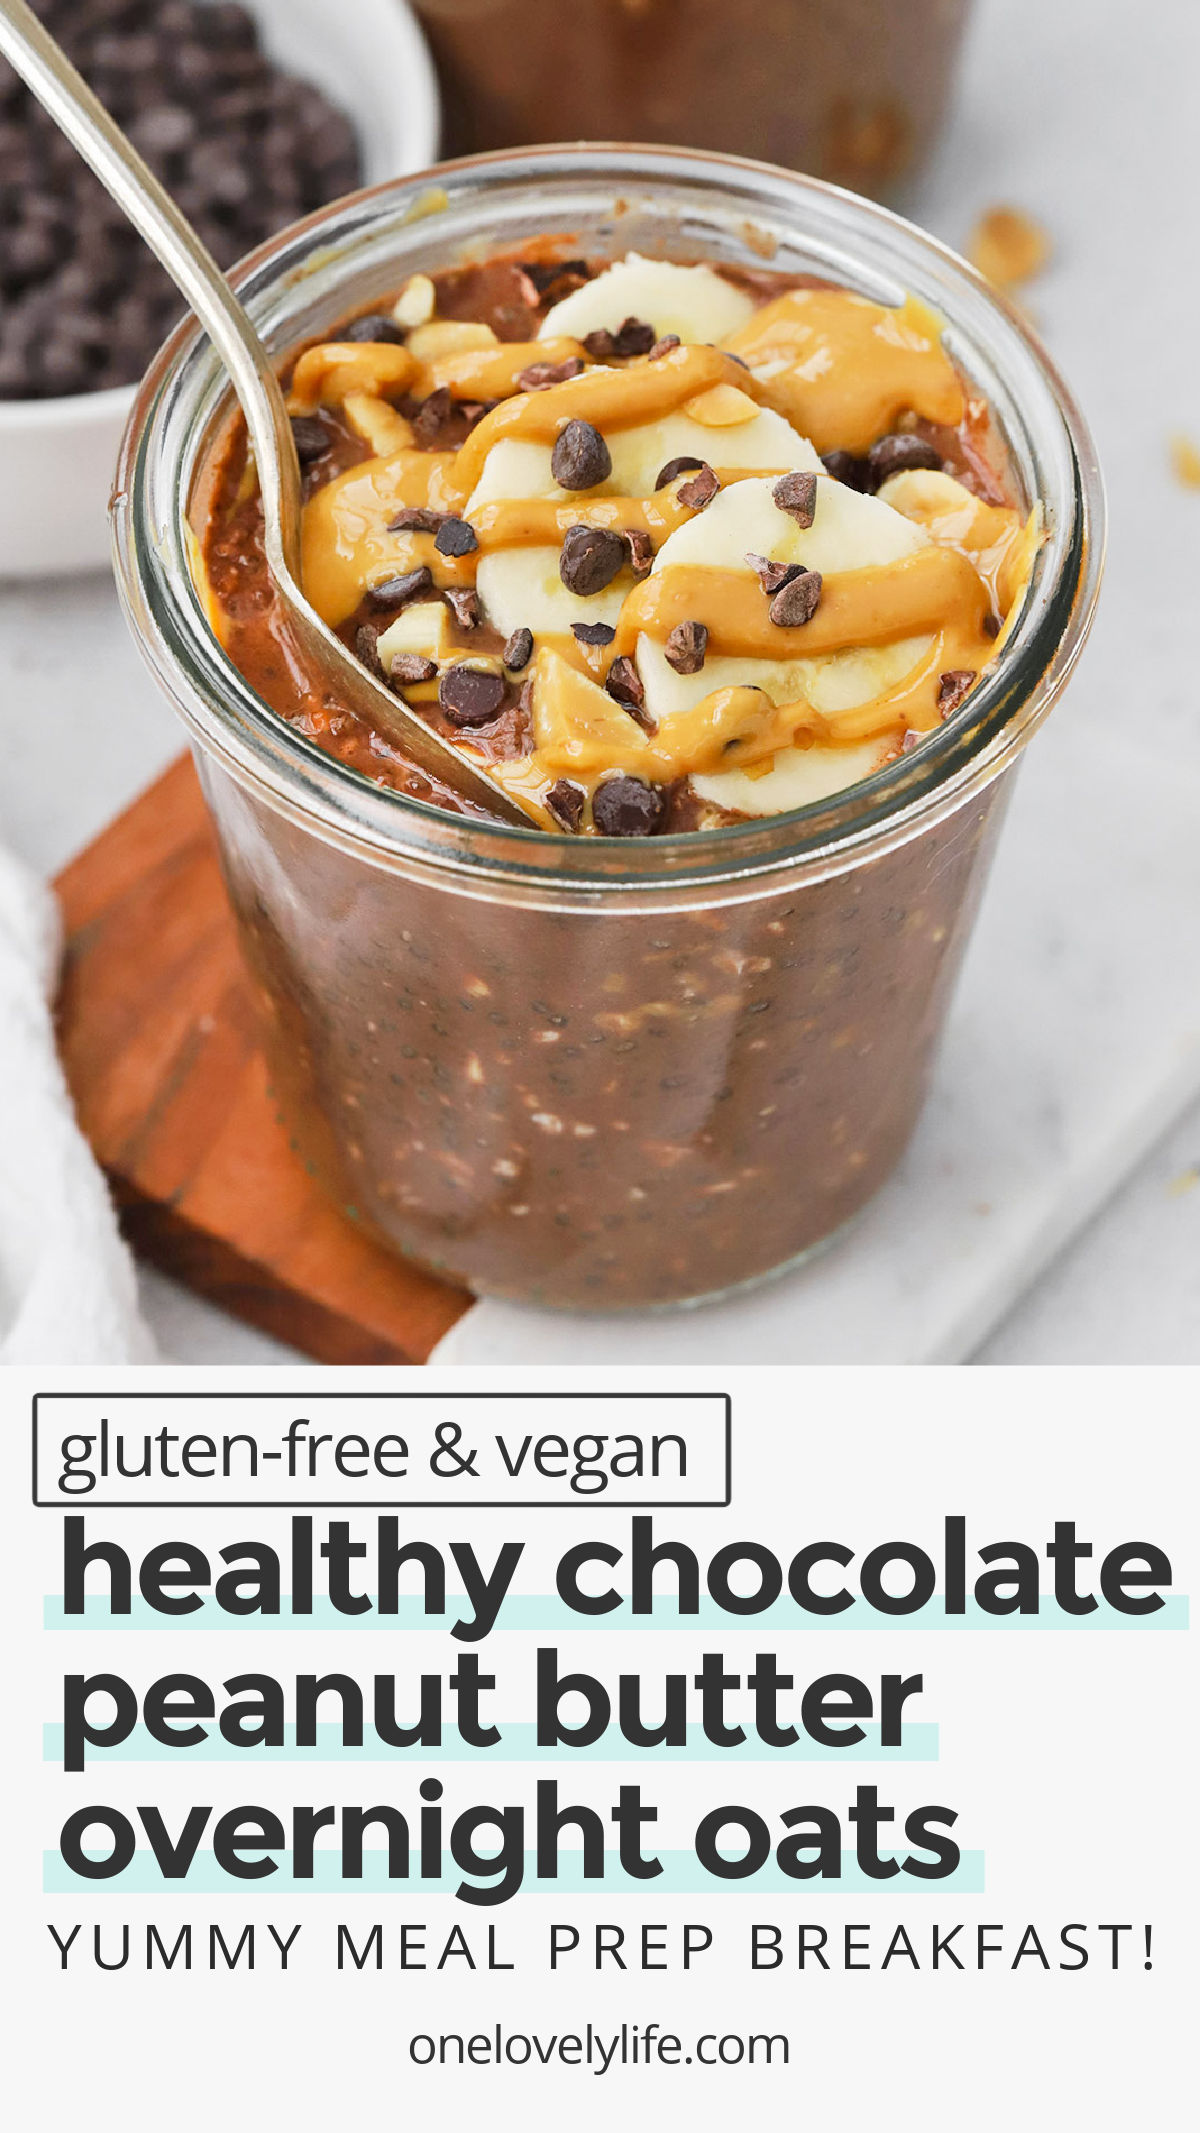 Healthy Chocolate Peanut Butter Overnight Oats - Wake up to a yummy meal prep breakfast with our peanut butter chocolate overnight oats recipe! It's delicious & easy to make in advance. (Gluten-Free, Vegan) / peanut butter overnight oats recipe / healthy breakfast / vegan breakfast / gluten-free breakfast / make ahead breakfast / grab and go breakfast / chocolate peanut butter oatmeal / chocolate peanut butter overnight oats without yogurt / chocolate peanut butter banana overnight oats